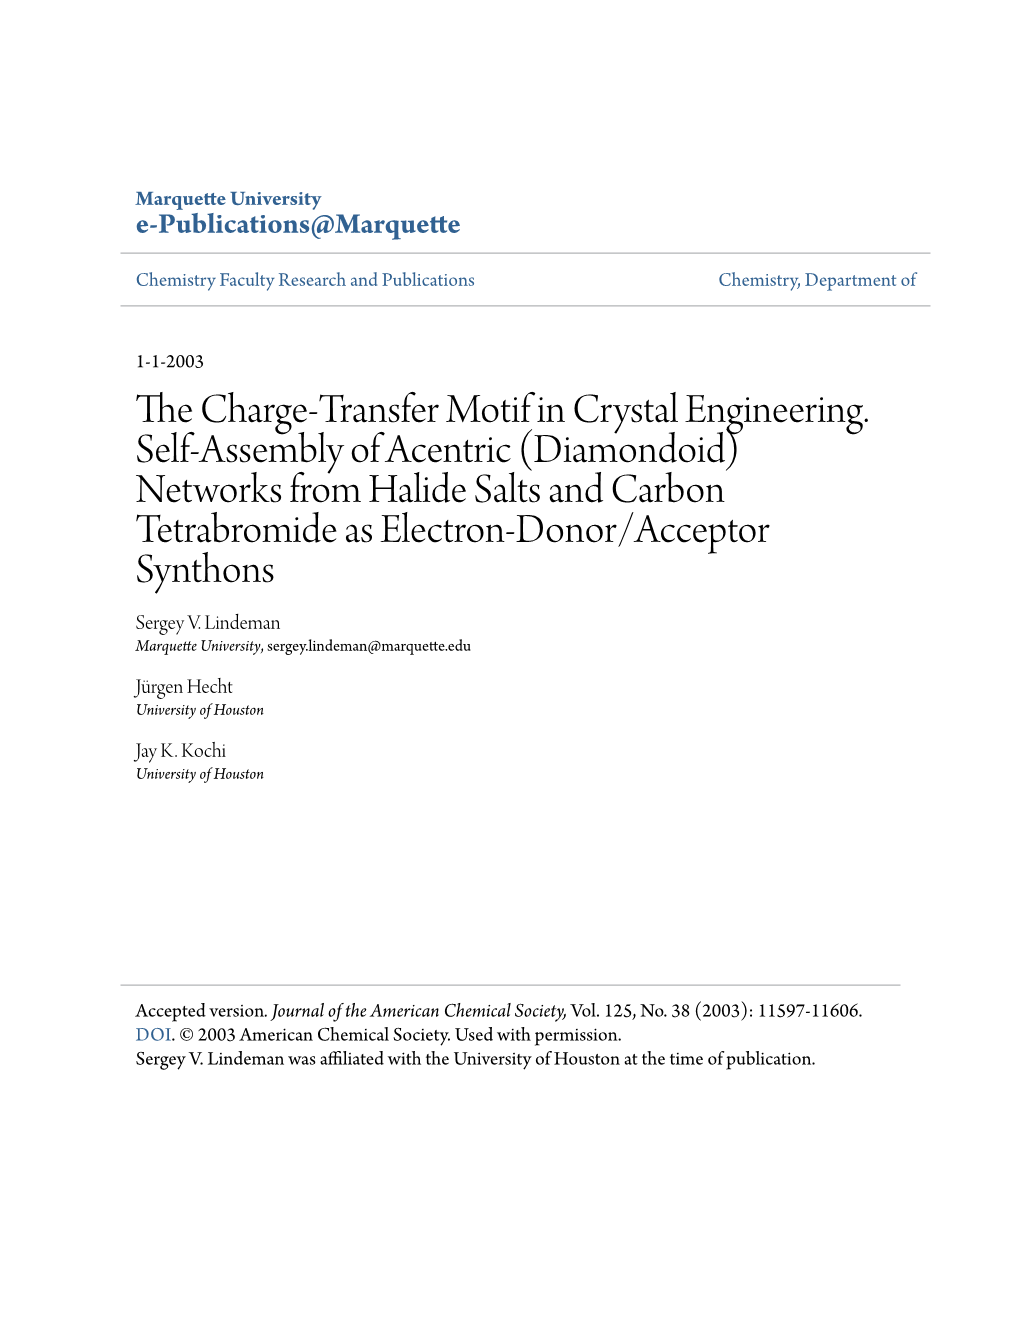 The Charge-Transfer Motif in Crystal Engineering